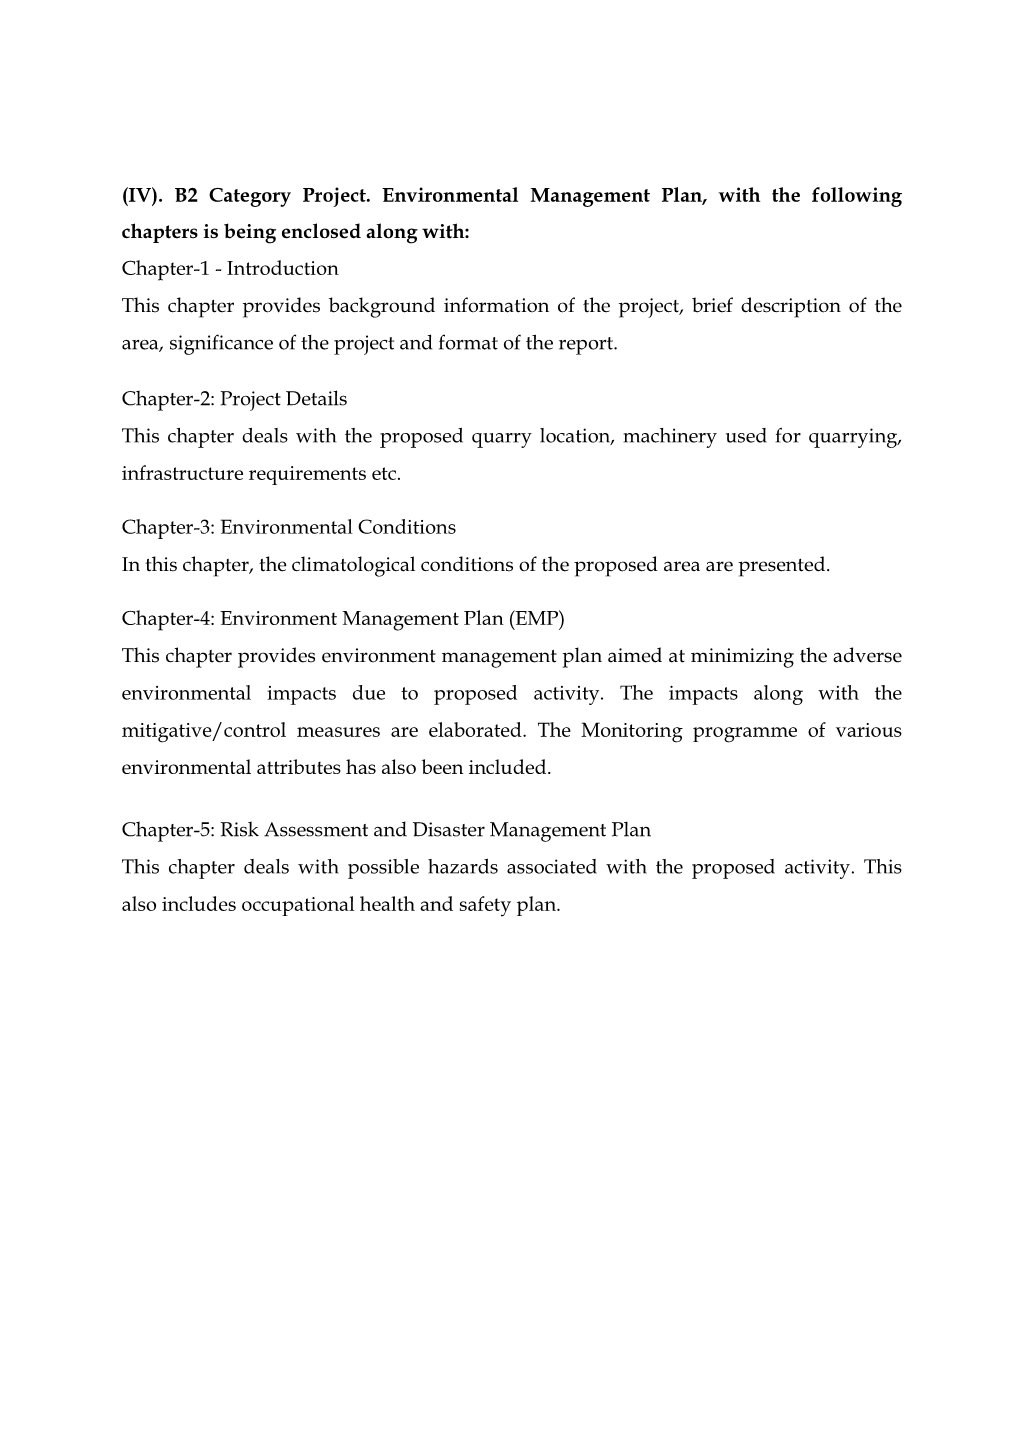 B2 Category Project. Environmental Management Plan, with the Following Chapters Is Being Enclosed Along With